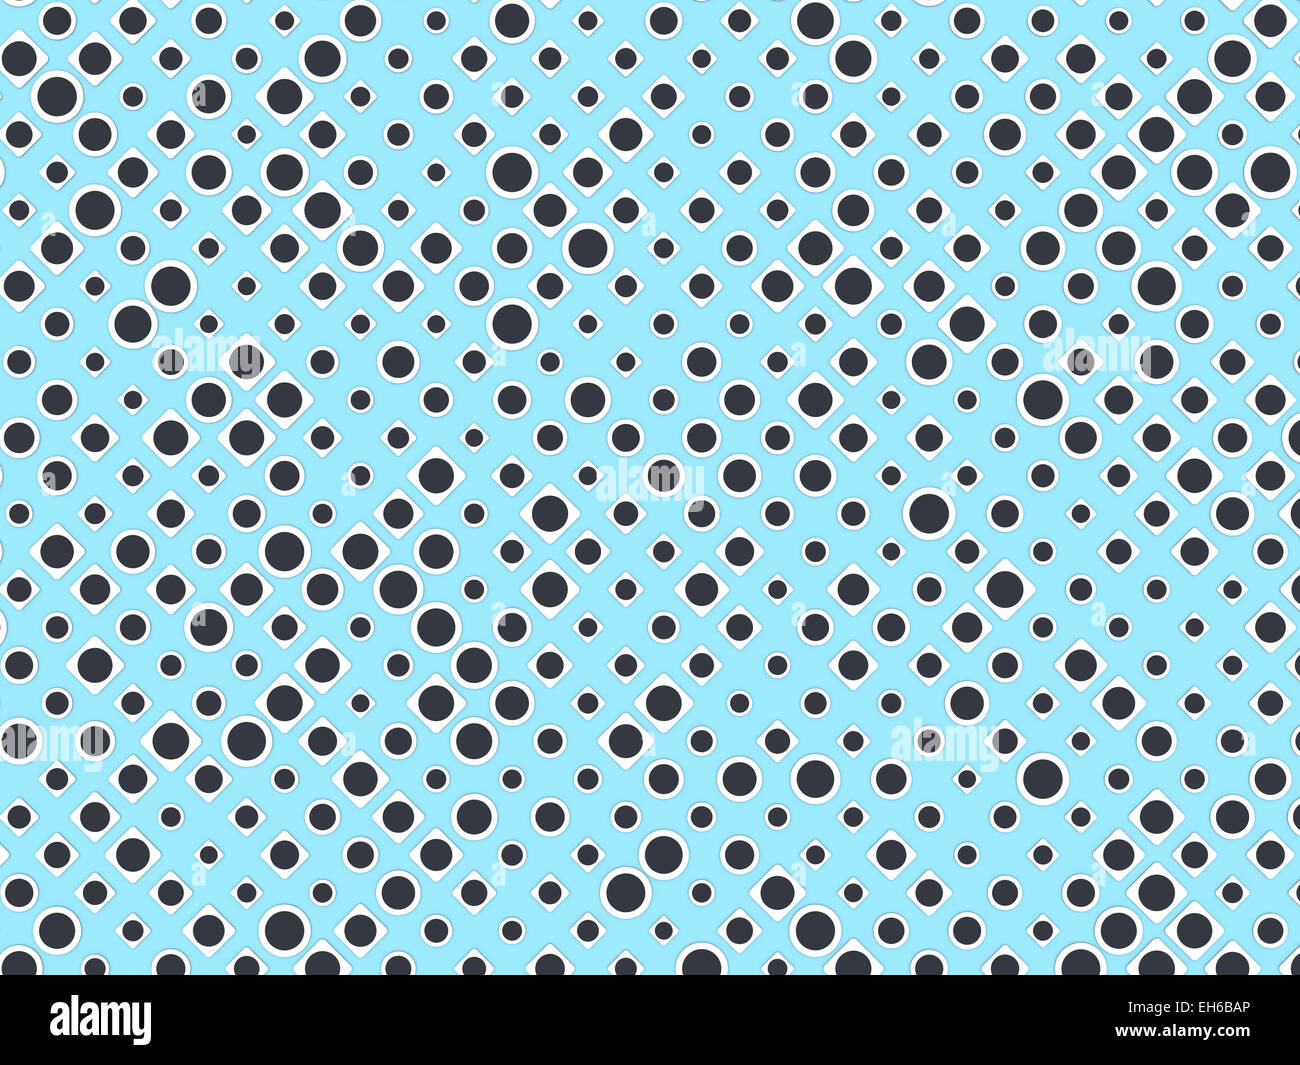 Polka dot pattern with black circles and white rectangles on blue. Useful as background Stock Photo